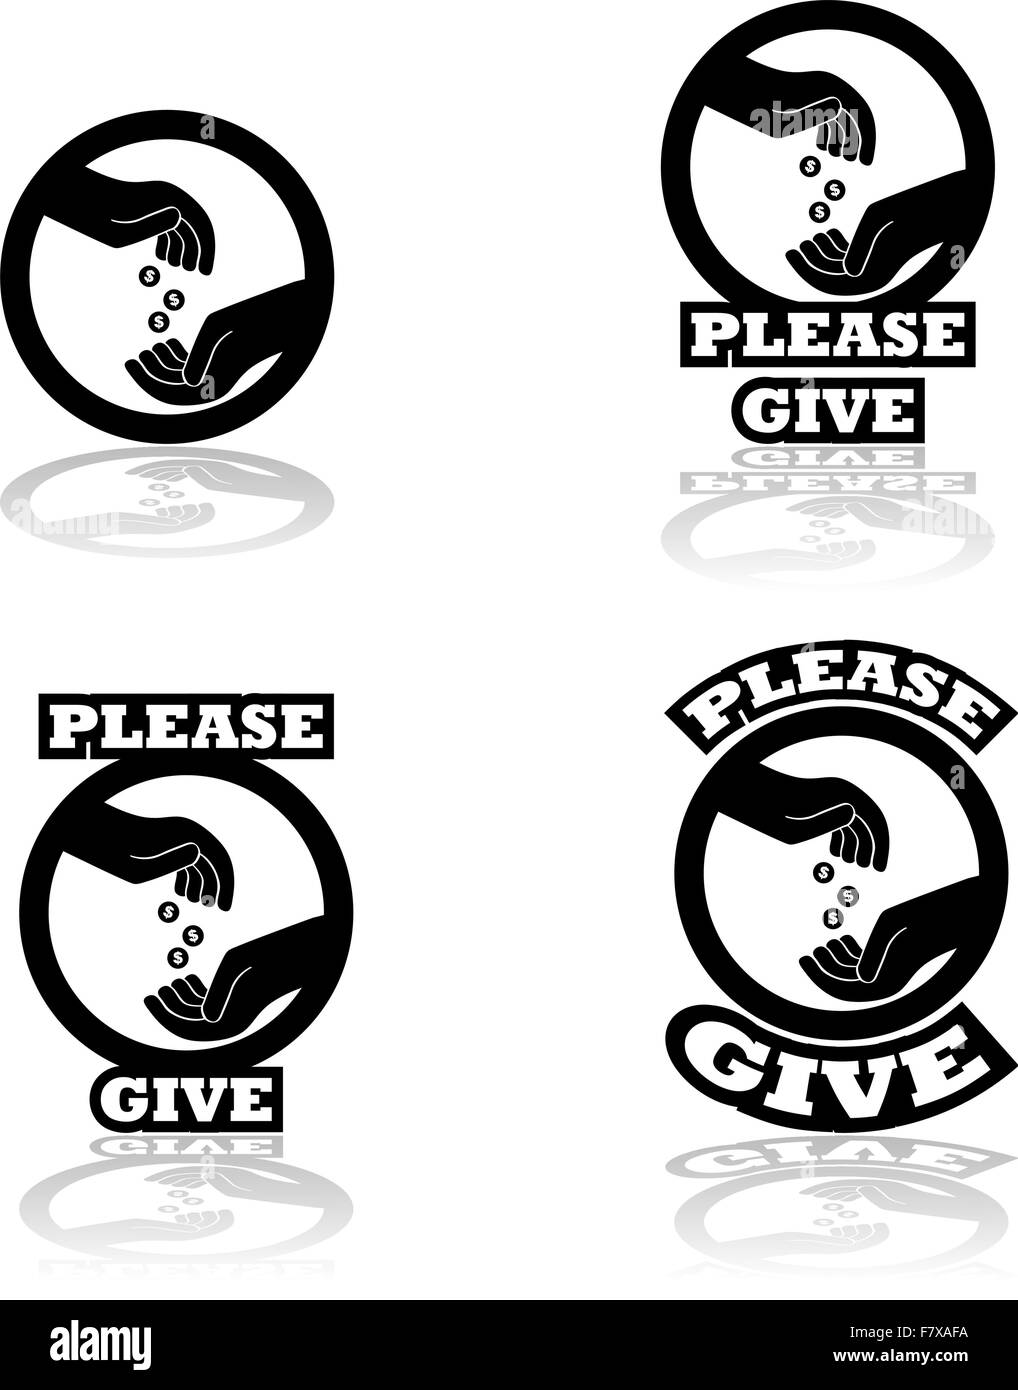 Please give Stock Vector